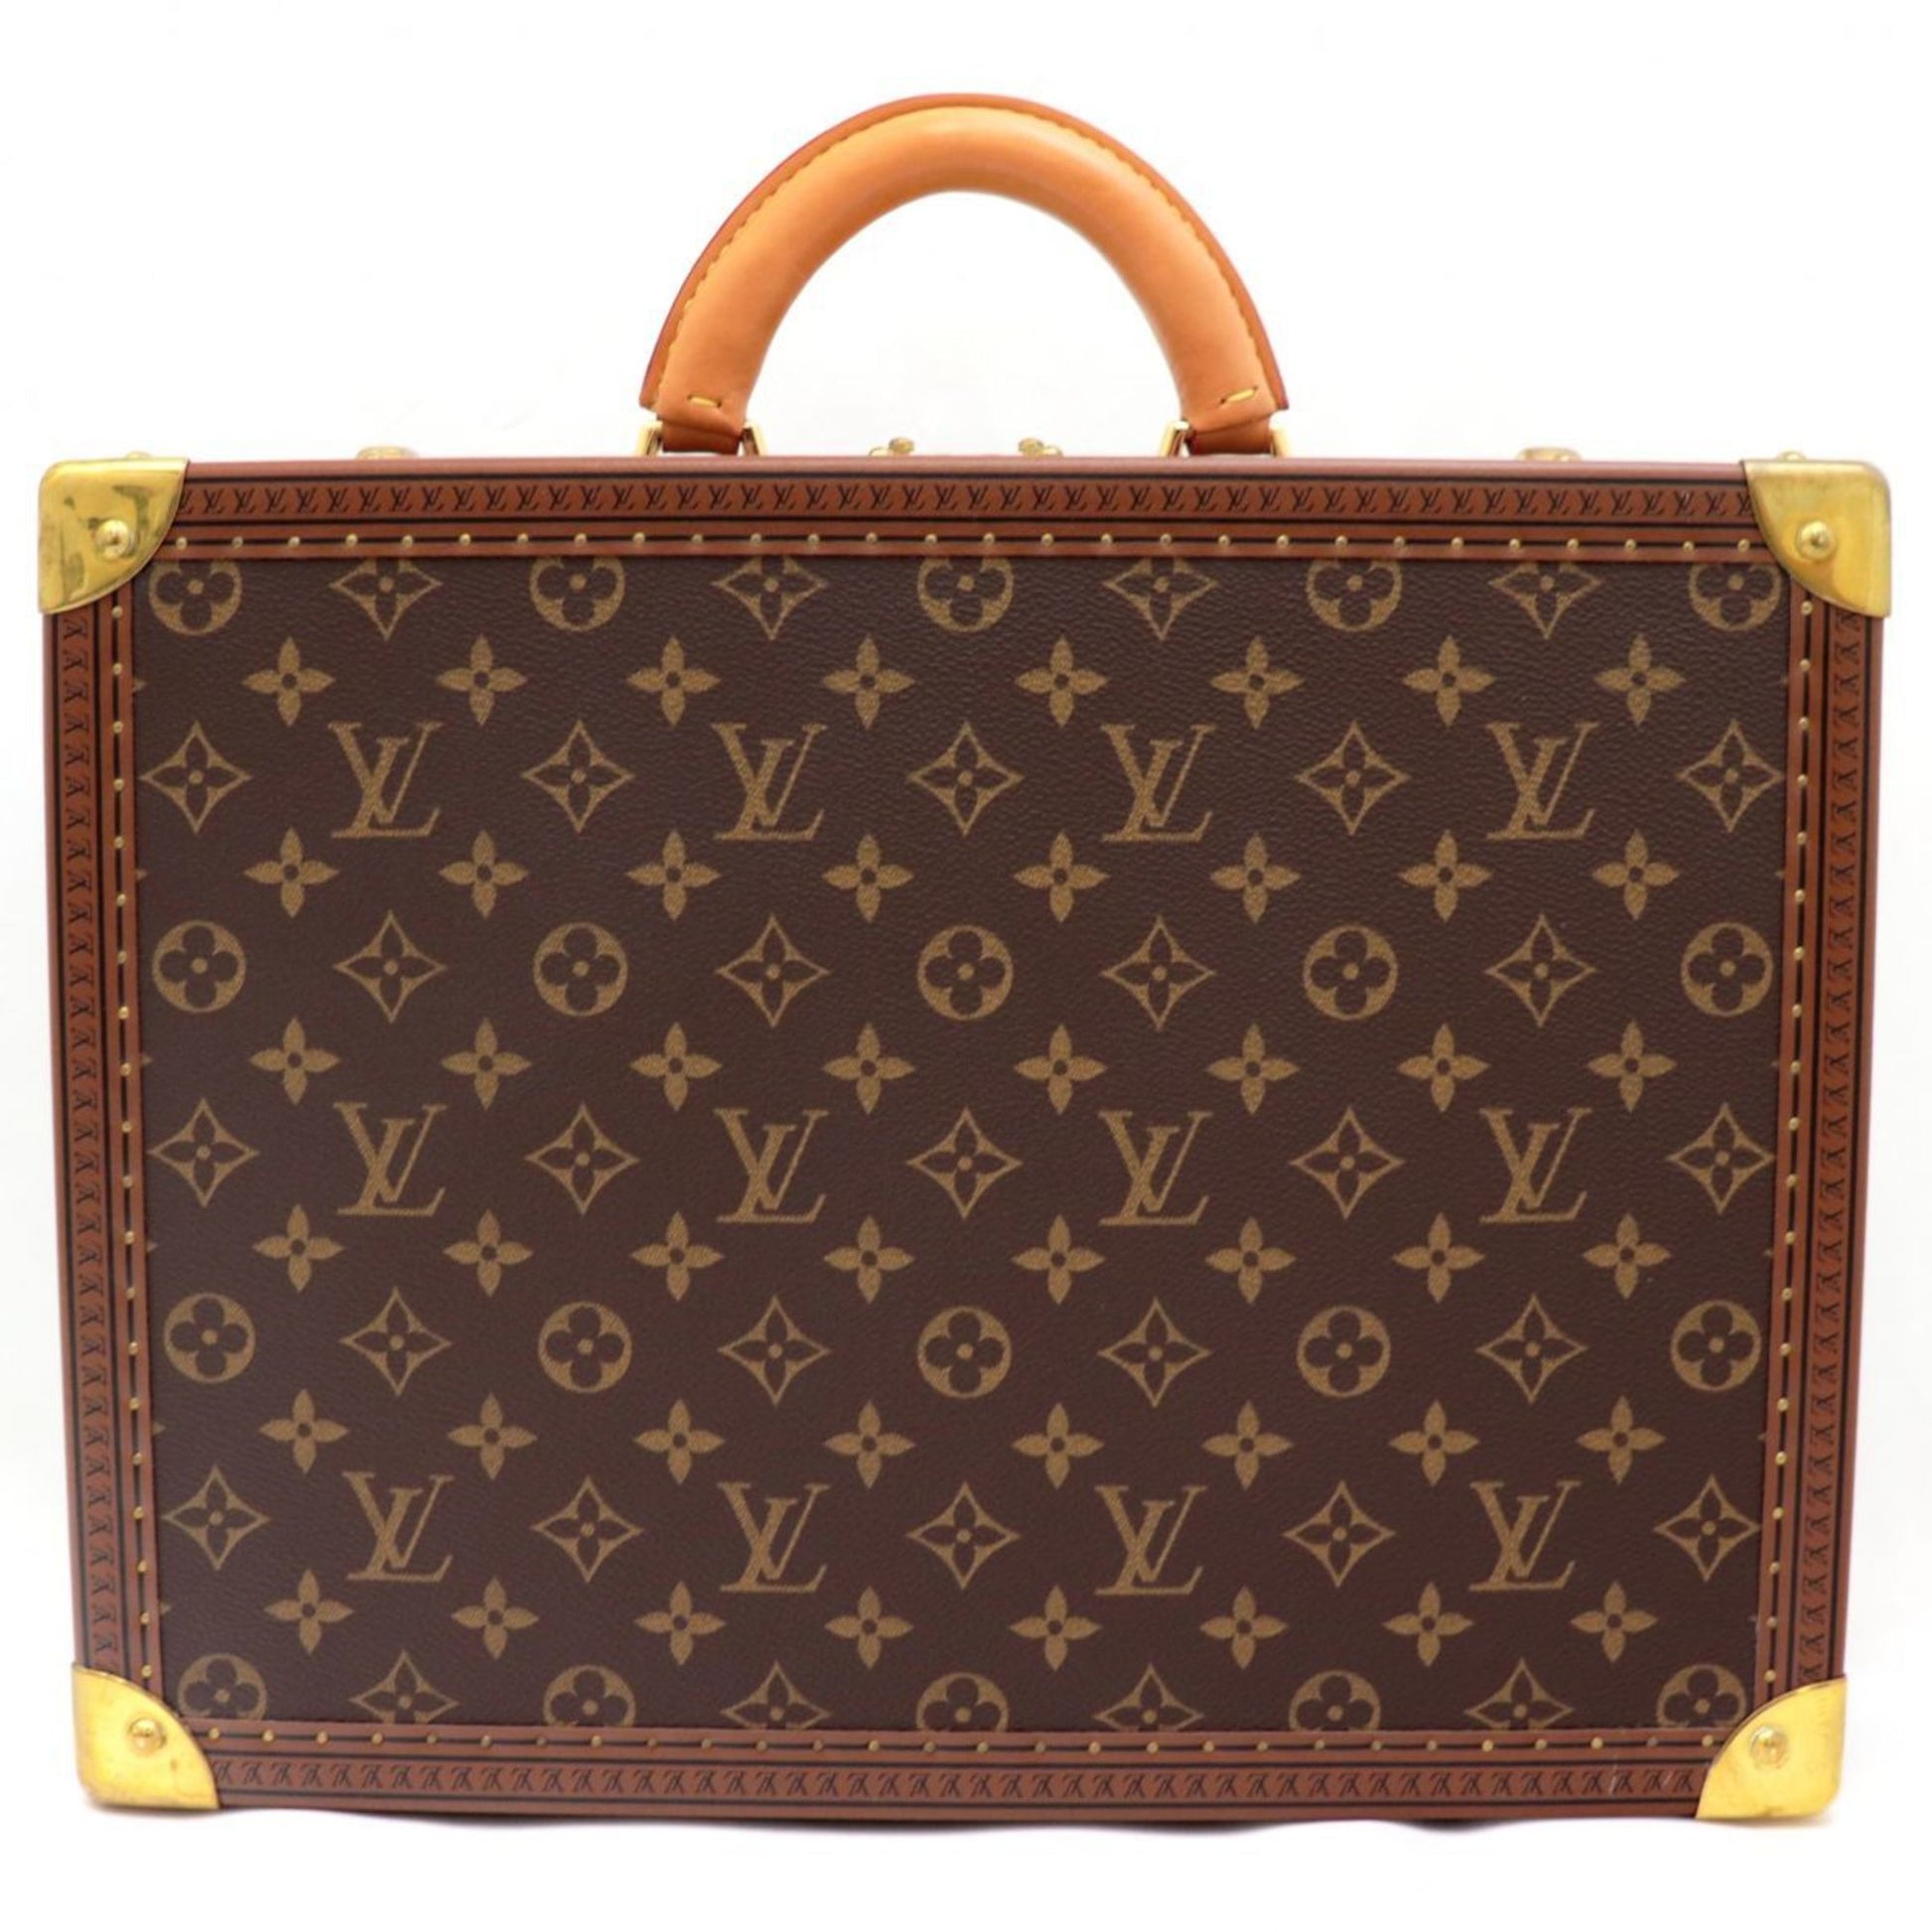 Authenticated Used Louis Vuitton Monogram Trunk Jewelry Box Case Brown x  Pink Purple Bag